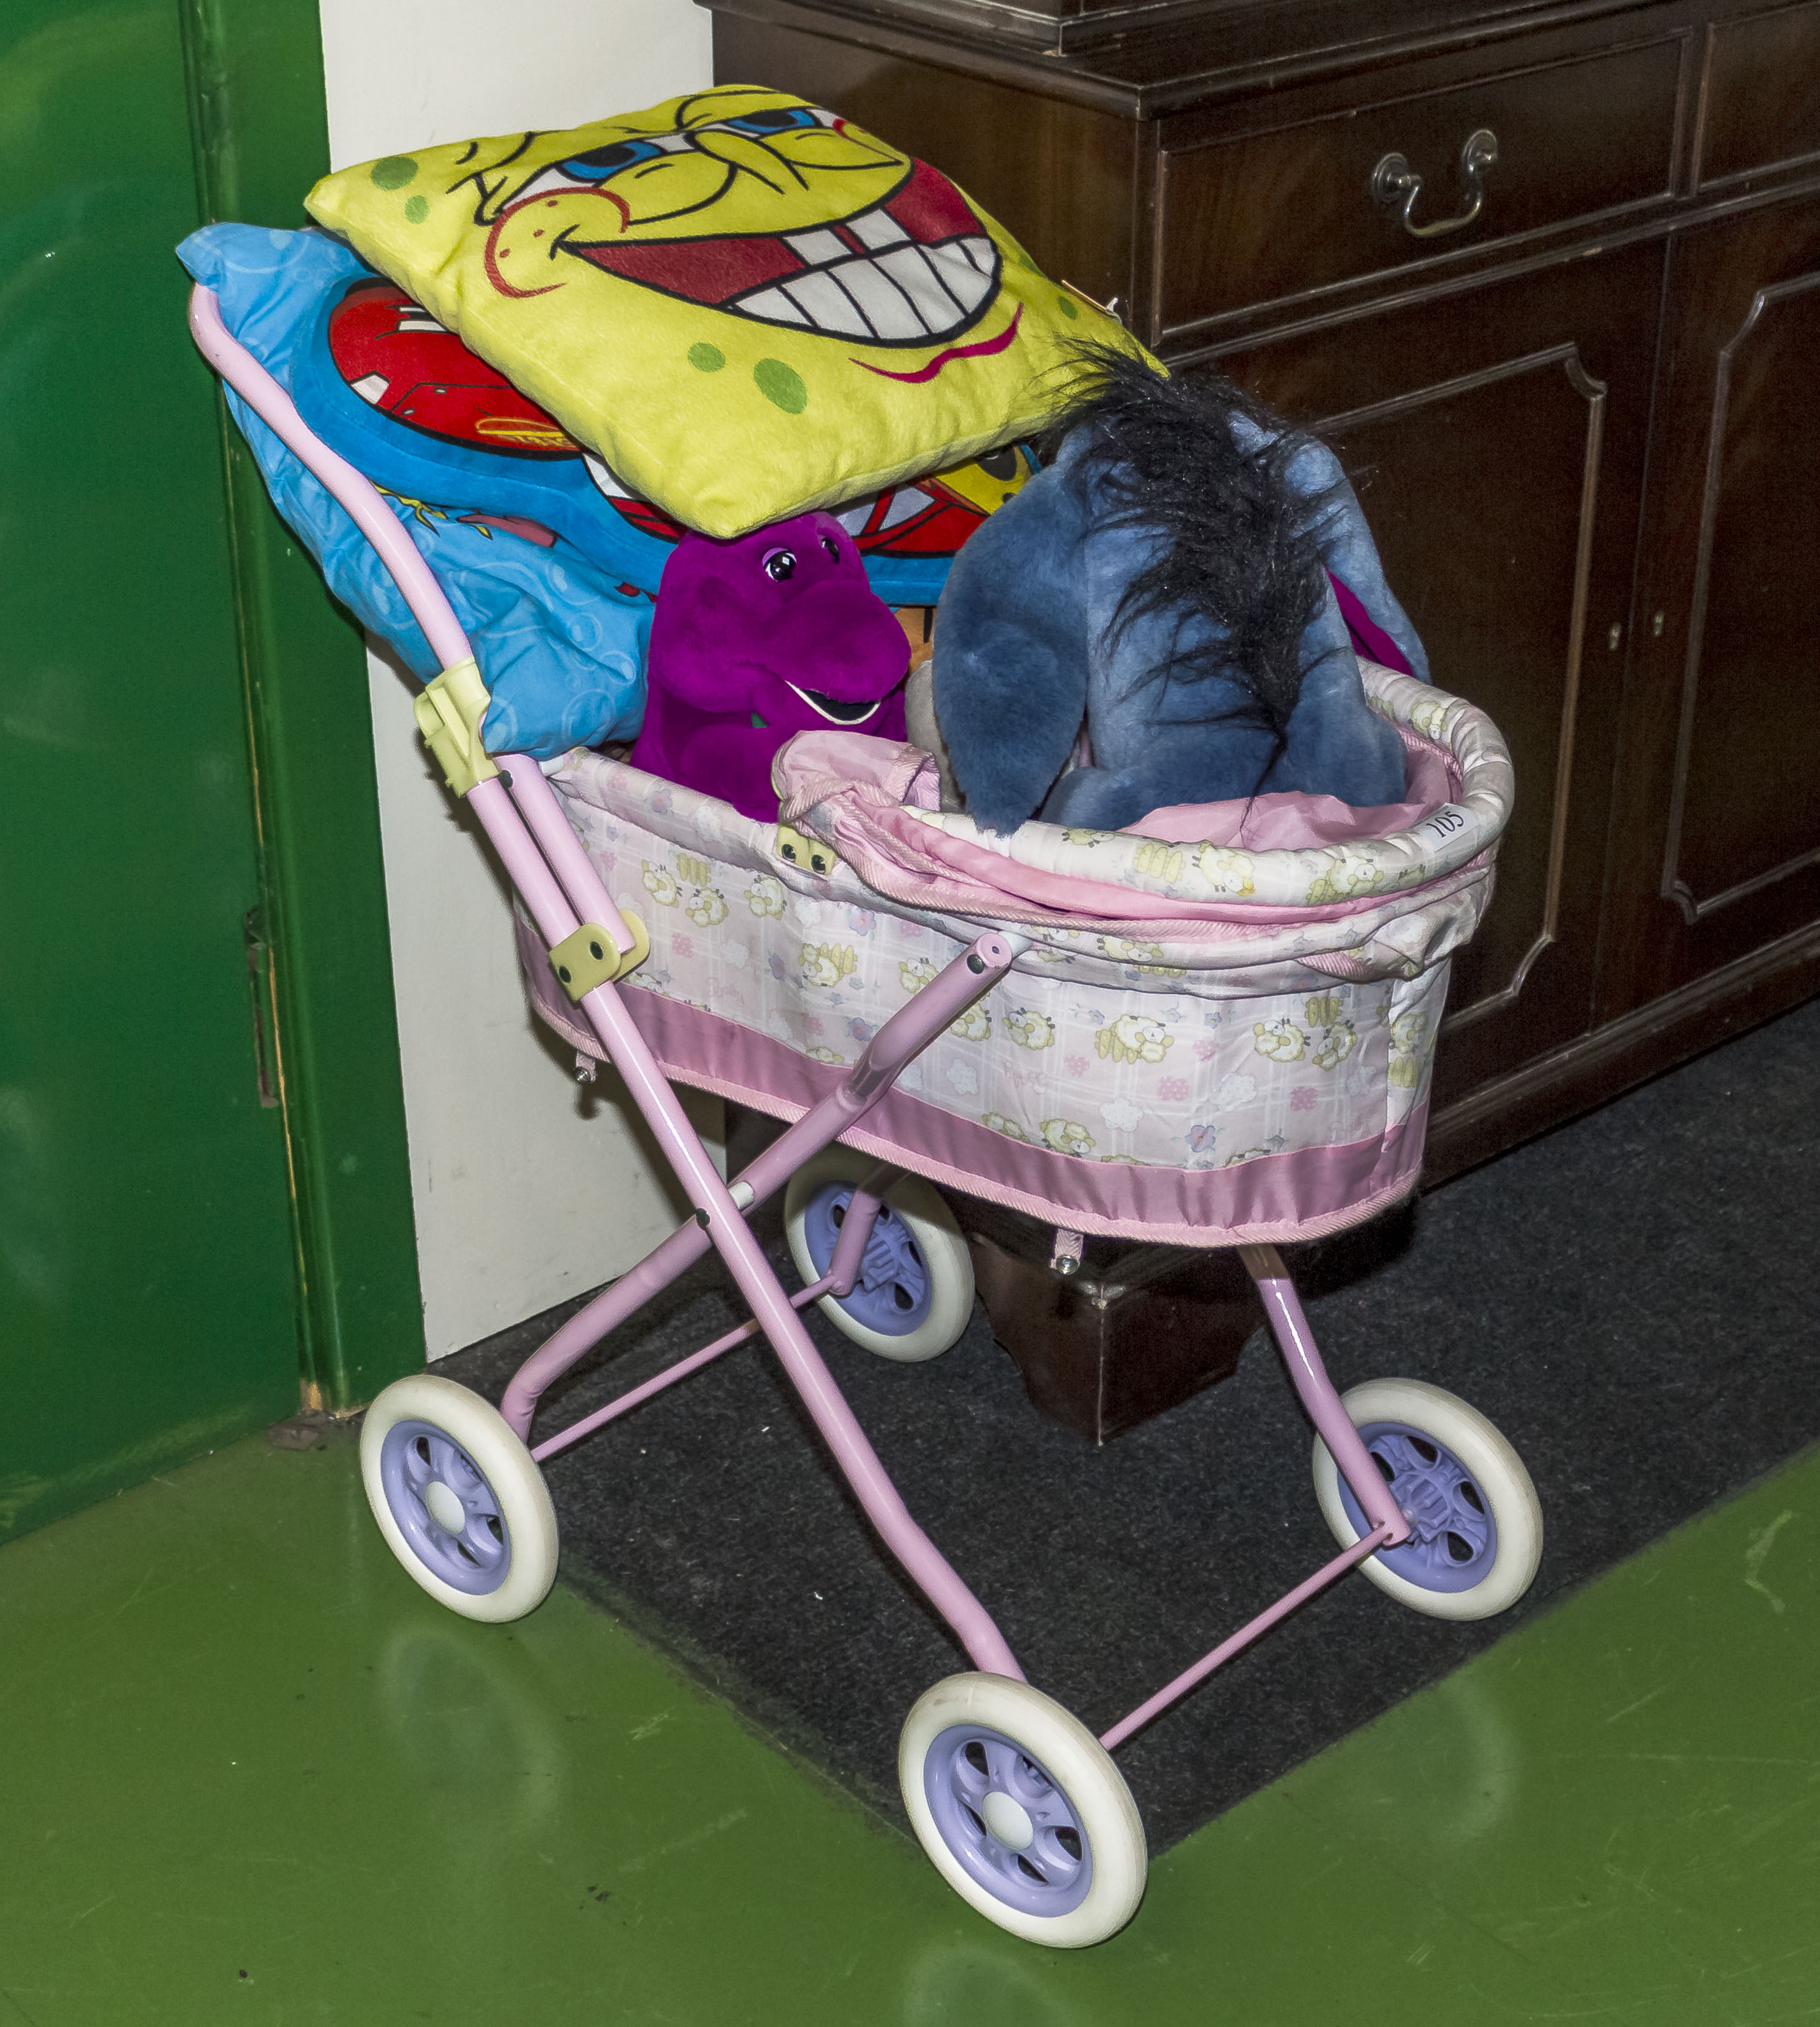 A toy pram and soft toys